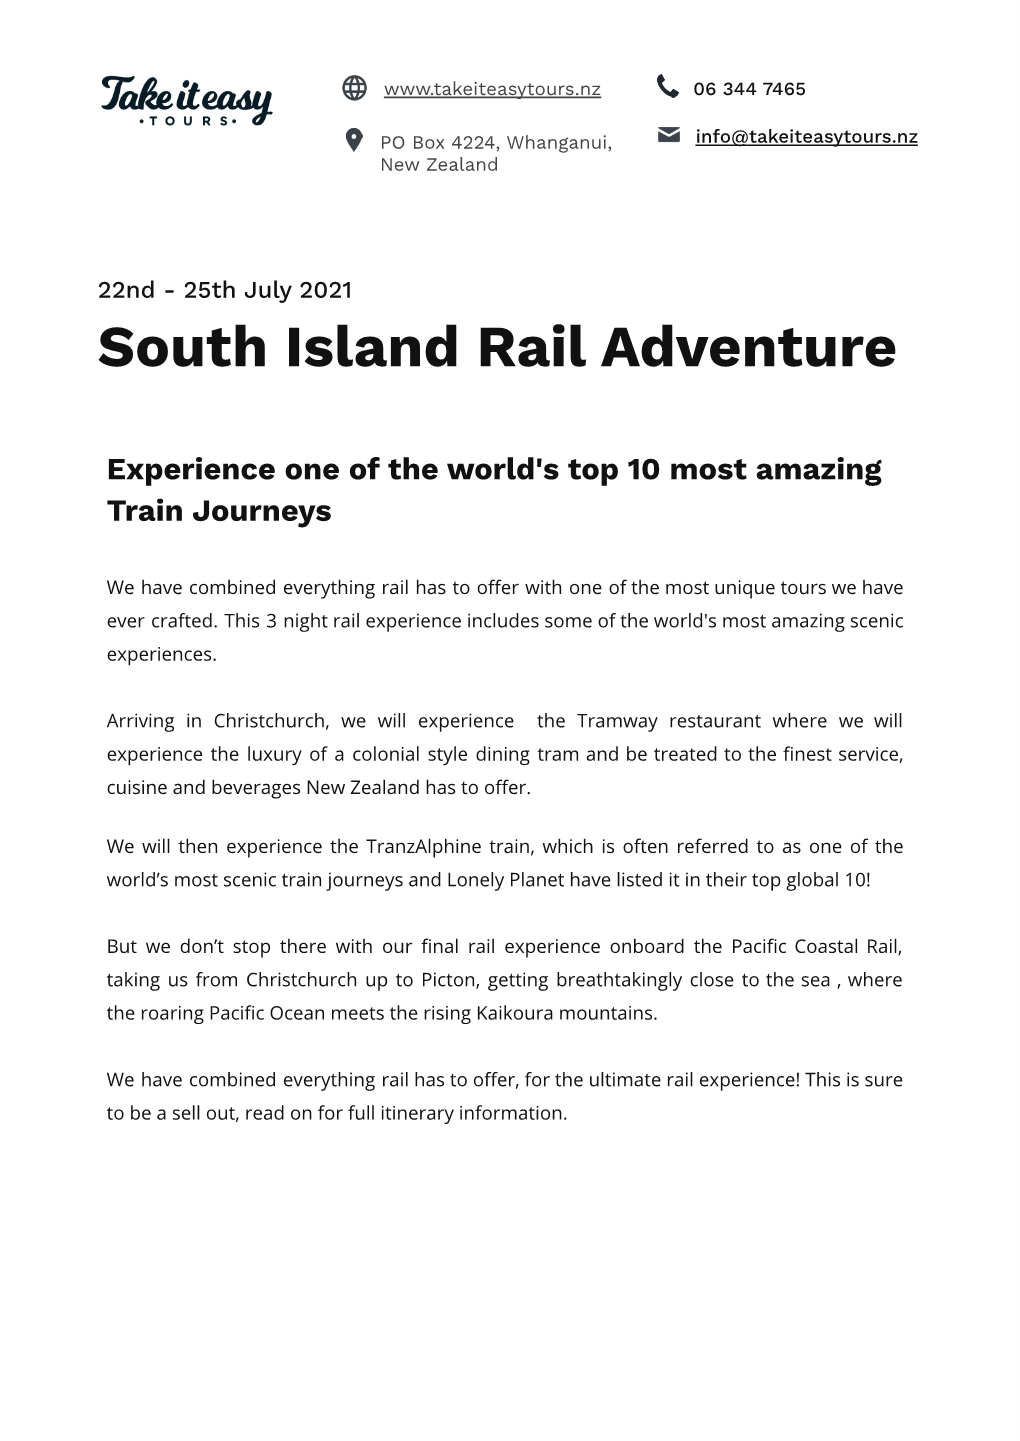 South Island Rail Adventure (Completed)